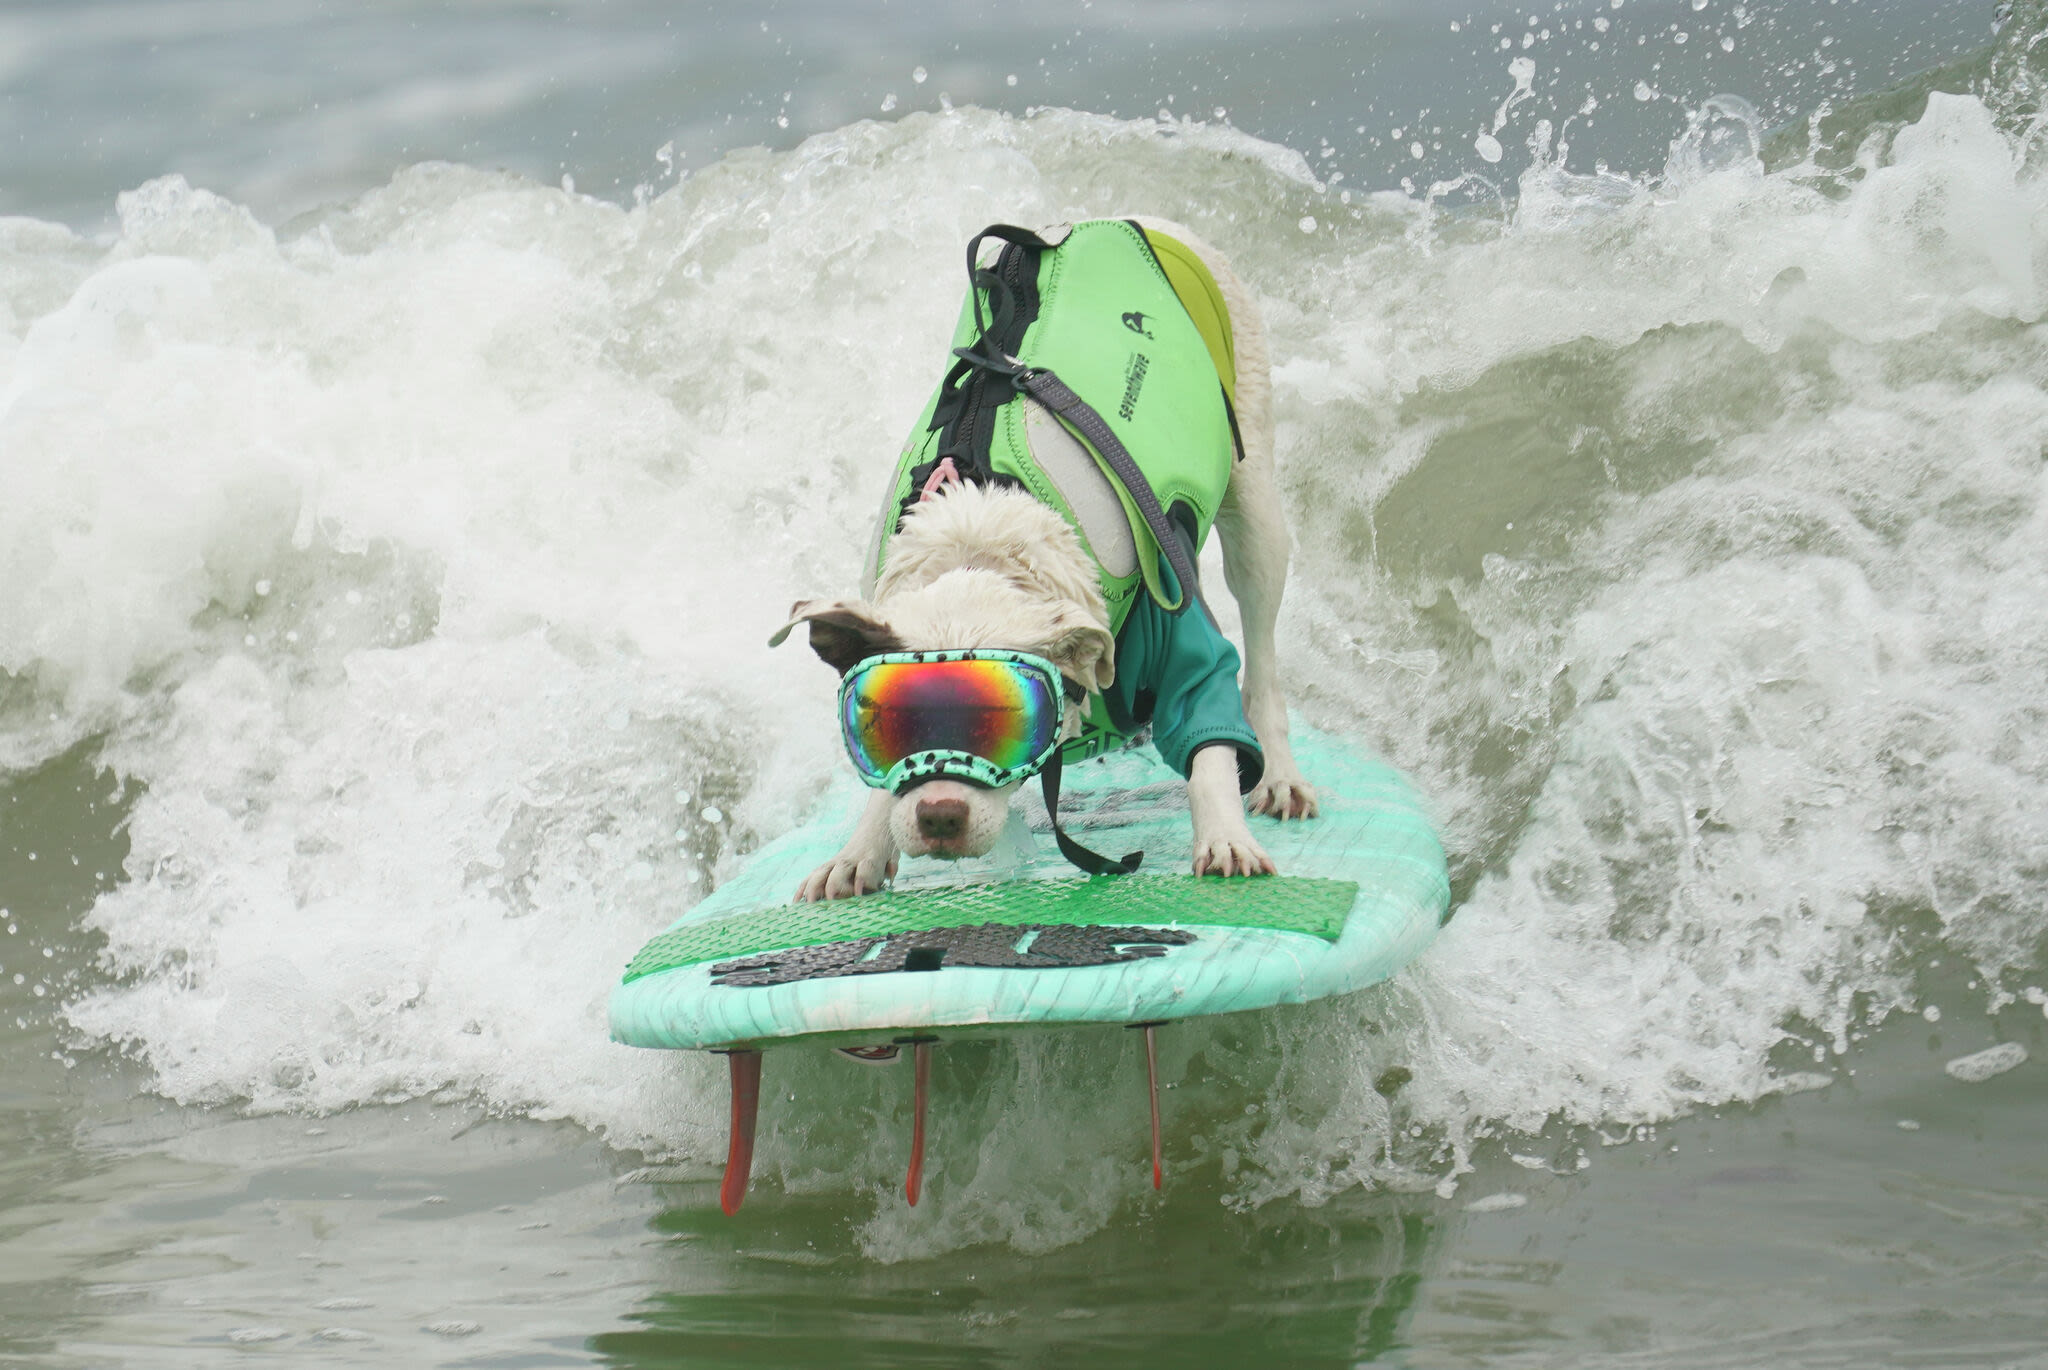 World Dog Surfing Championships draws thousands to Bay Area beach